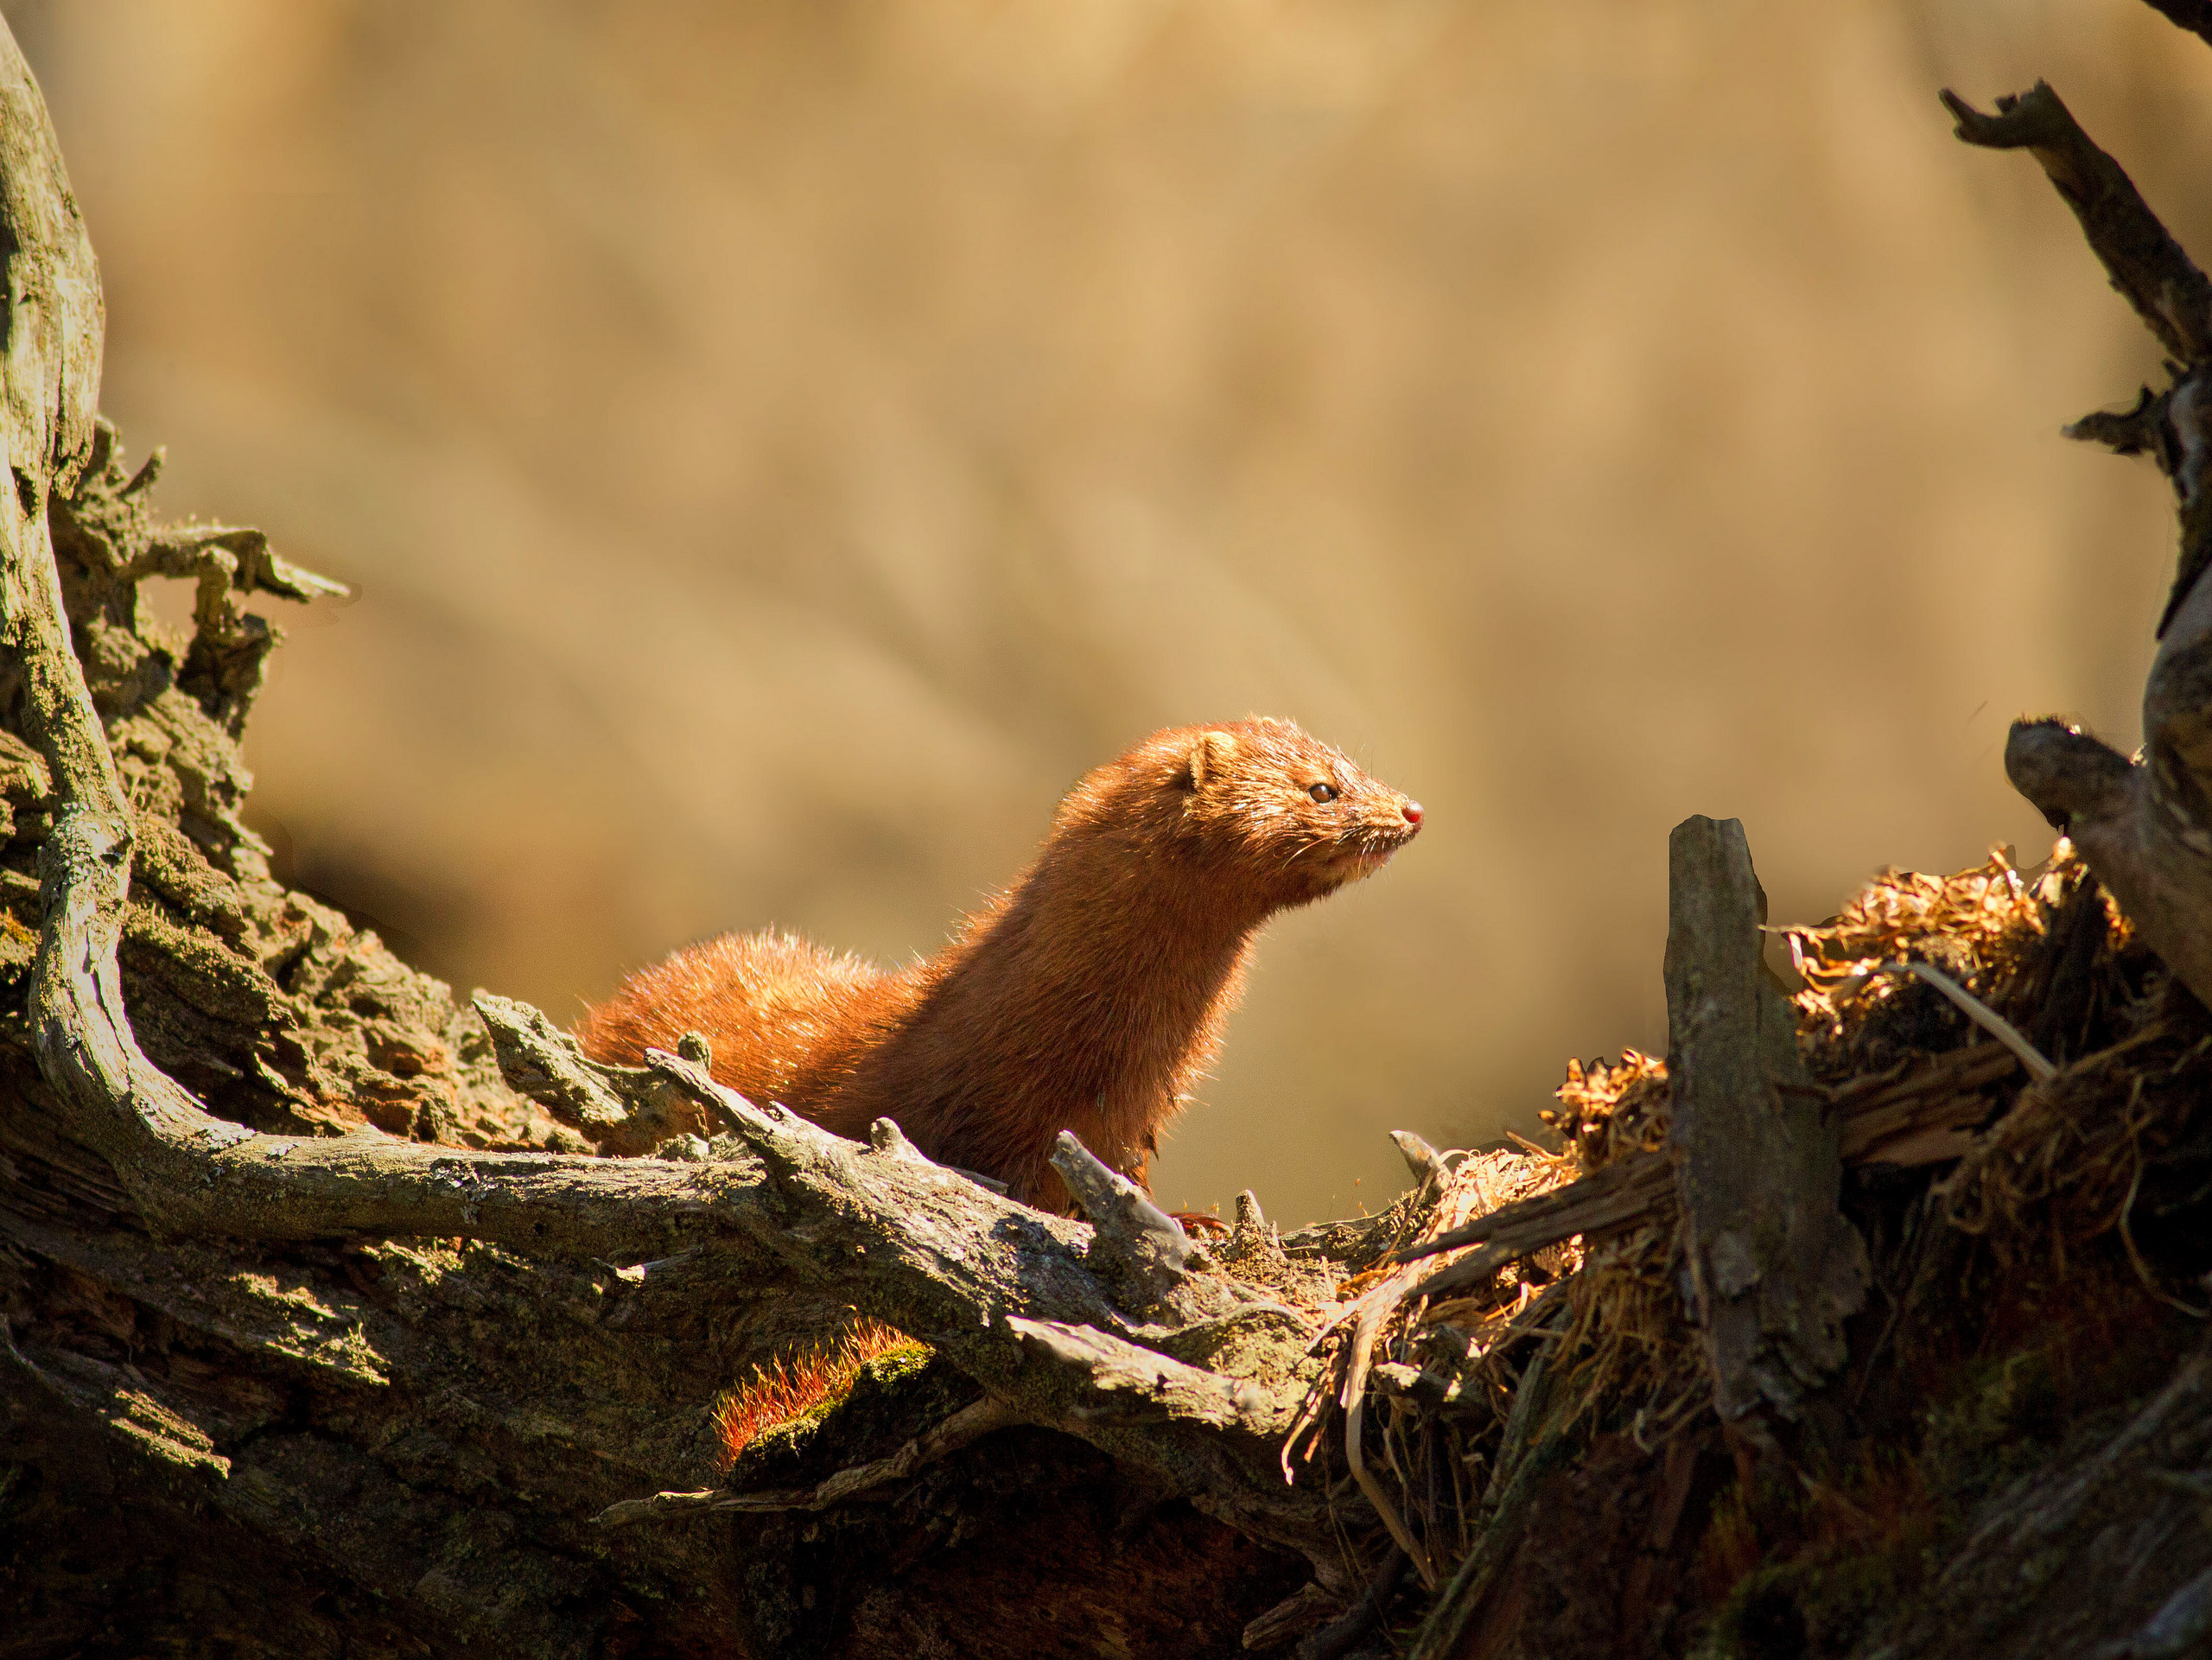 Our American Mink | Finger Lakes Land Trust